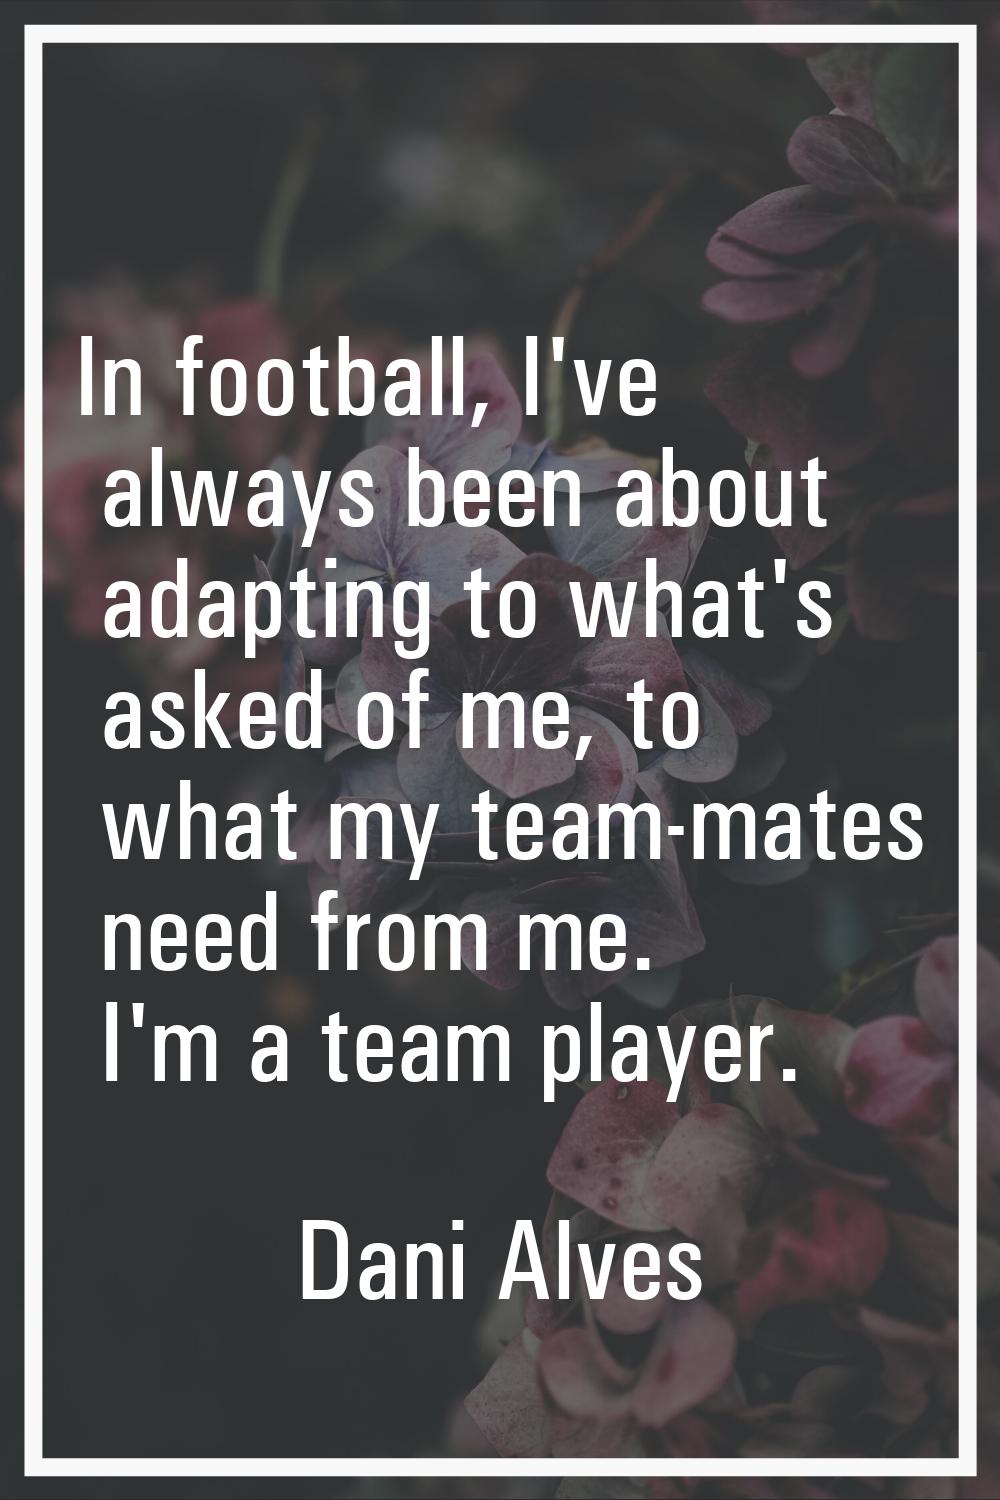 In football, I've always been about adapting to what's asked of me, to what my team-mates need from